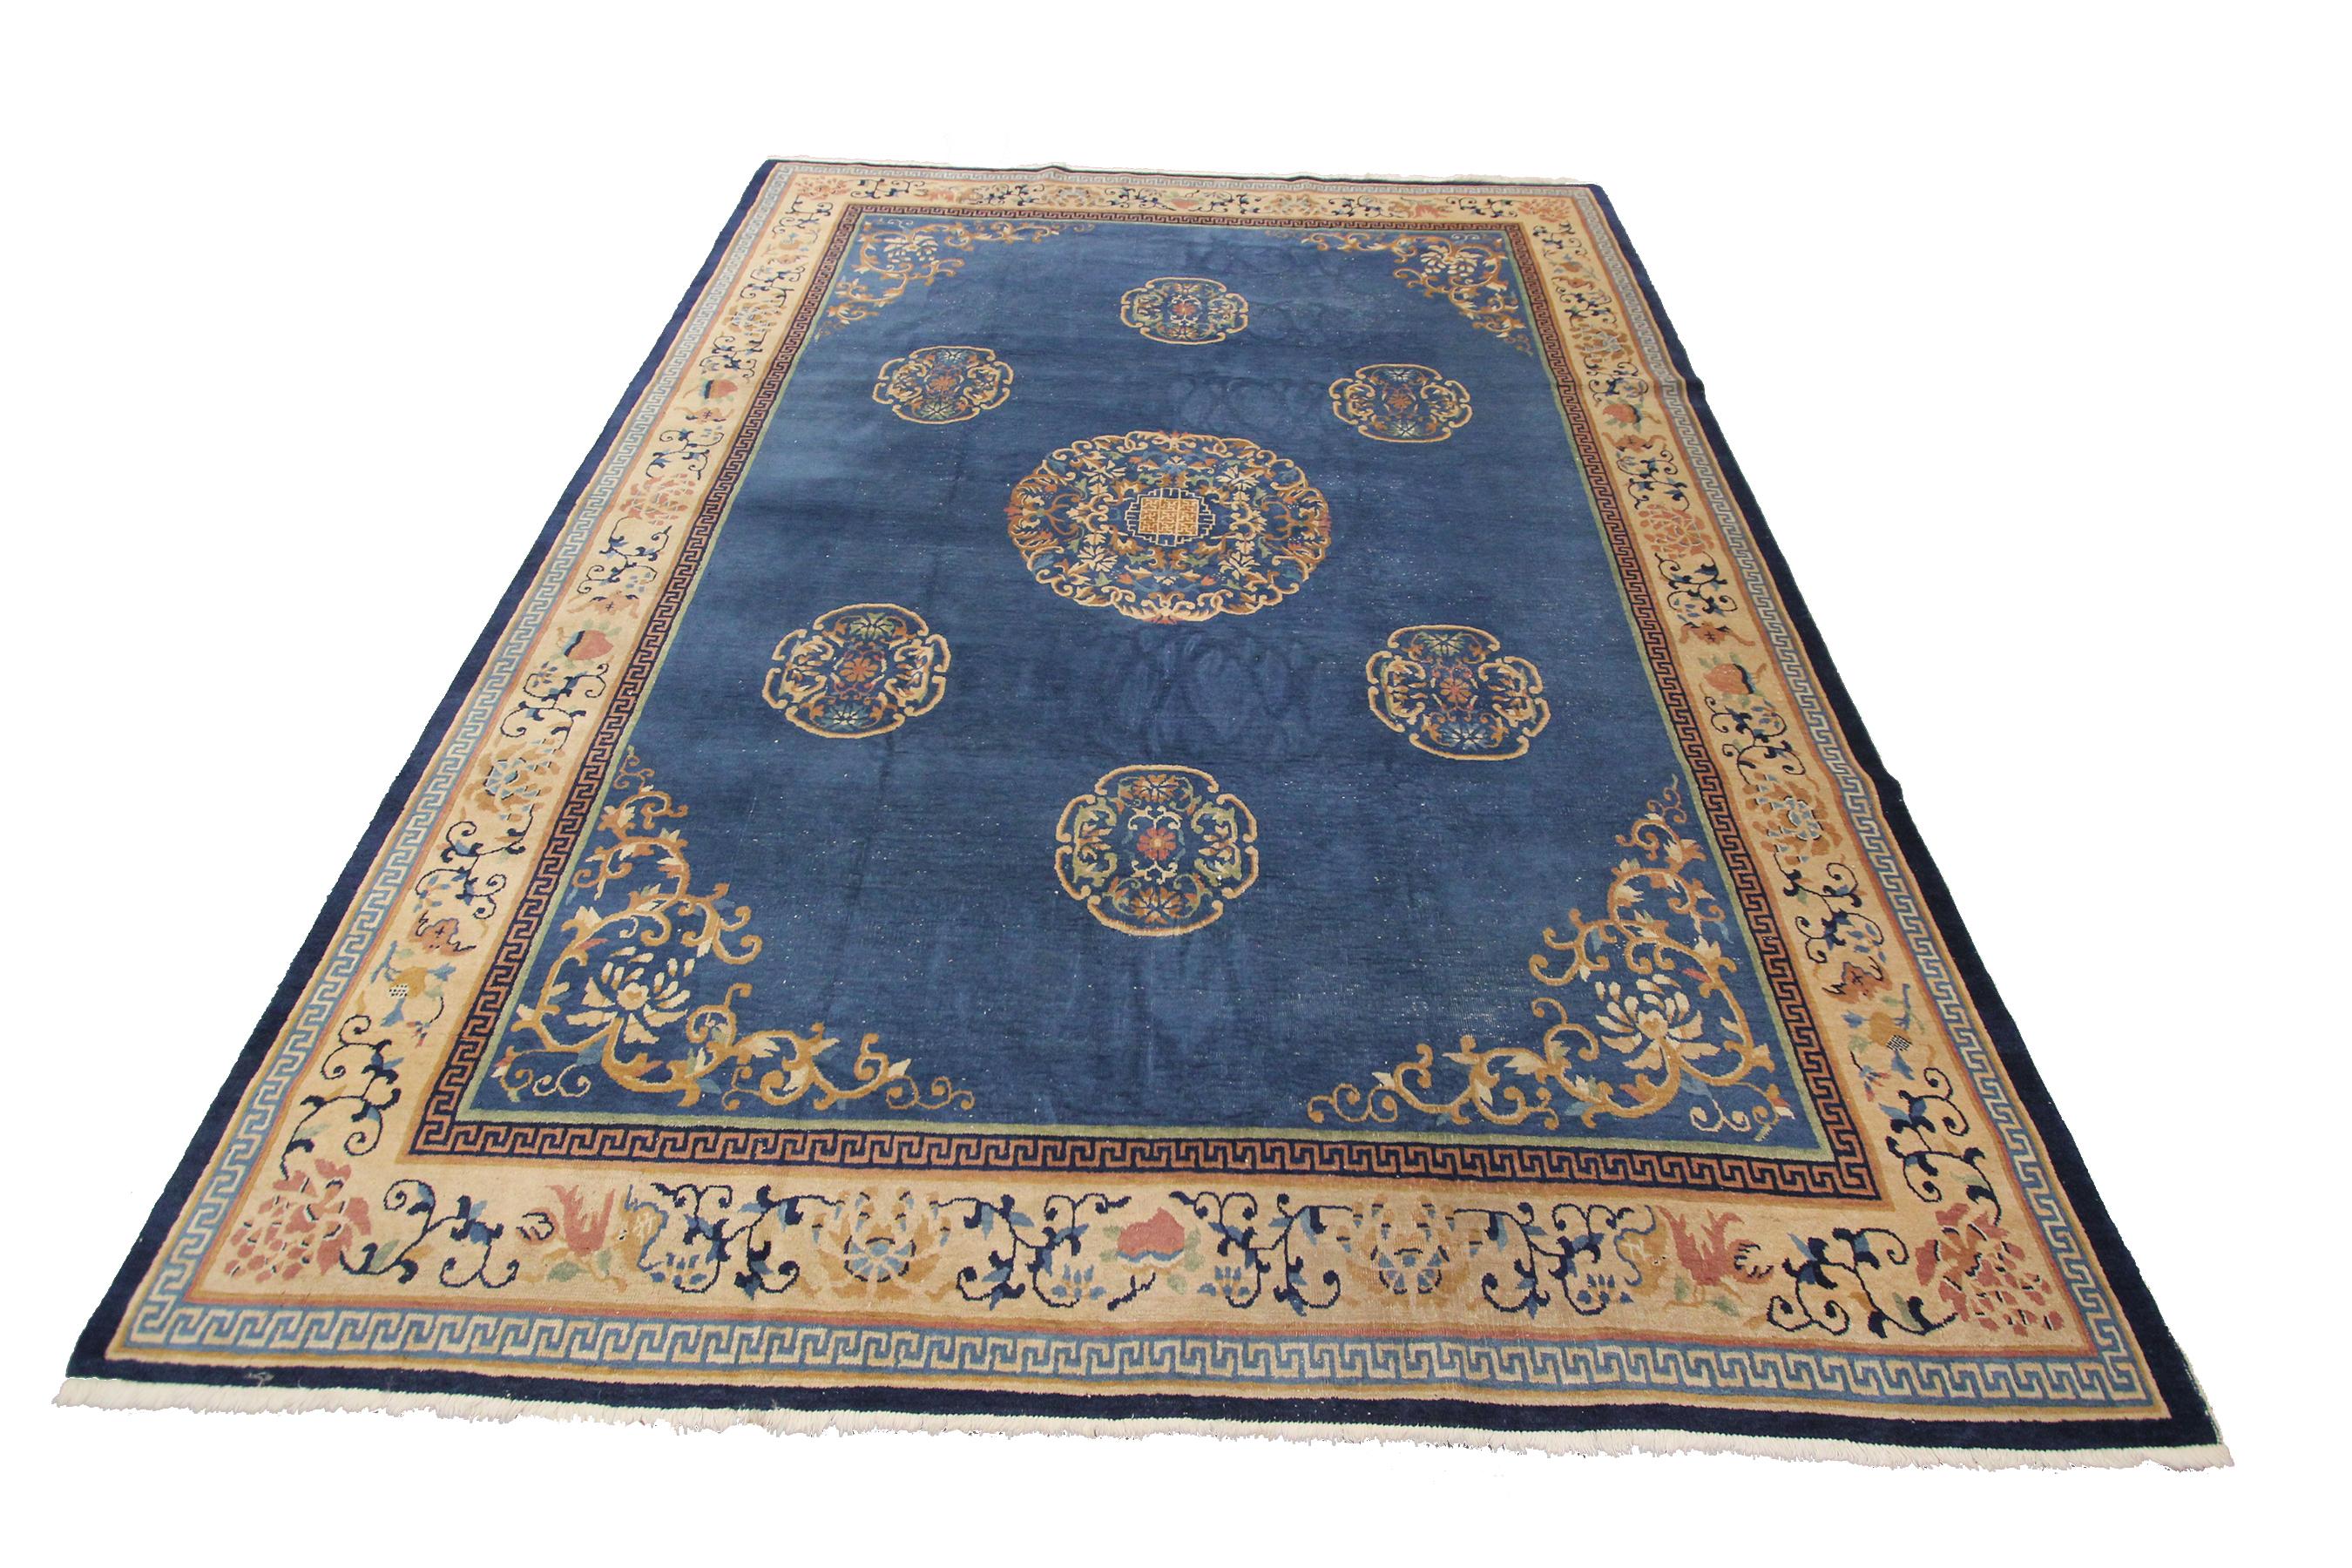 Antique Art Deco Chinese Rug Antique Chinese Rug Antique Art Deco Peking In Good Condition For Sale In New York, NY